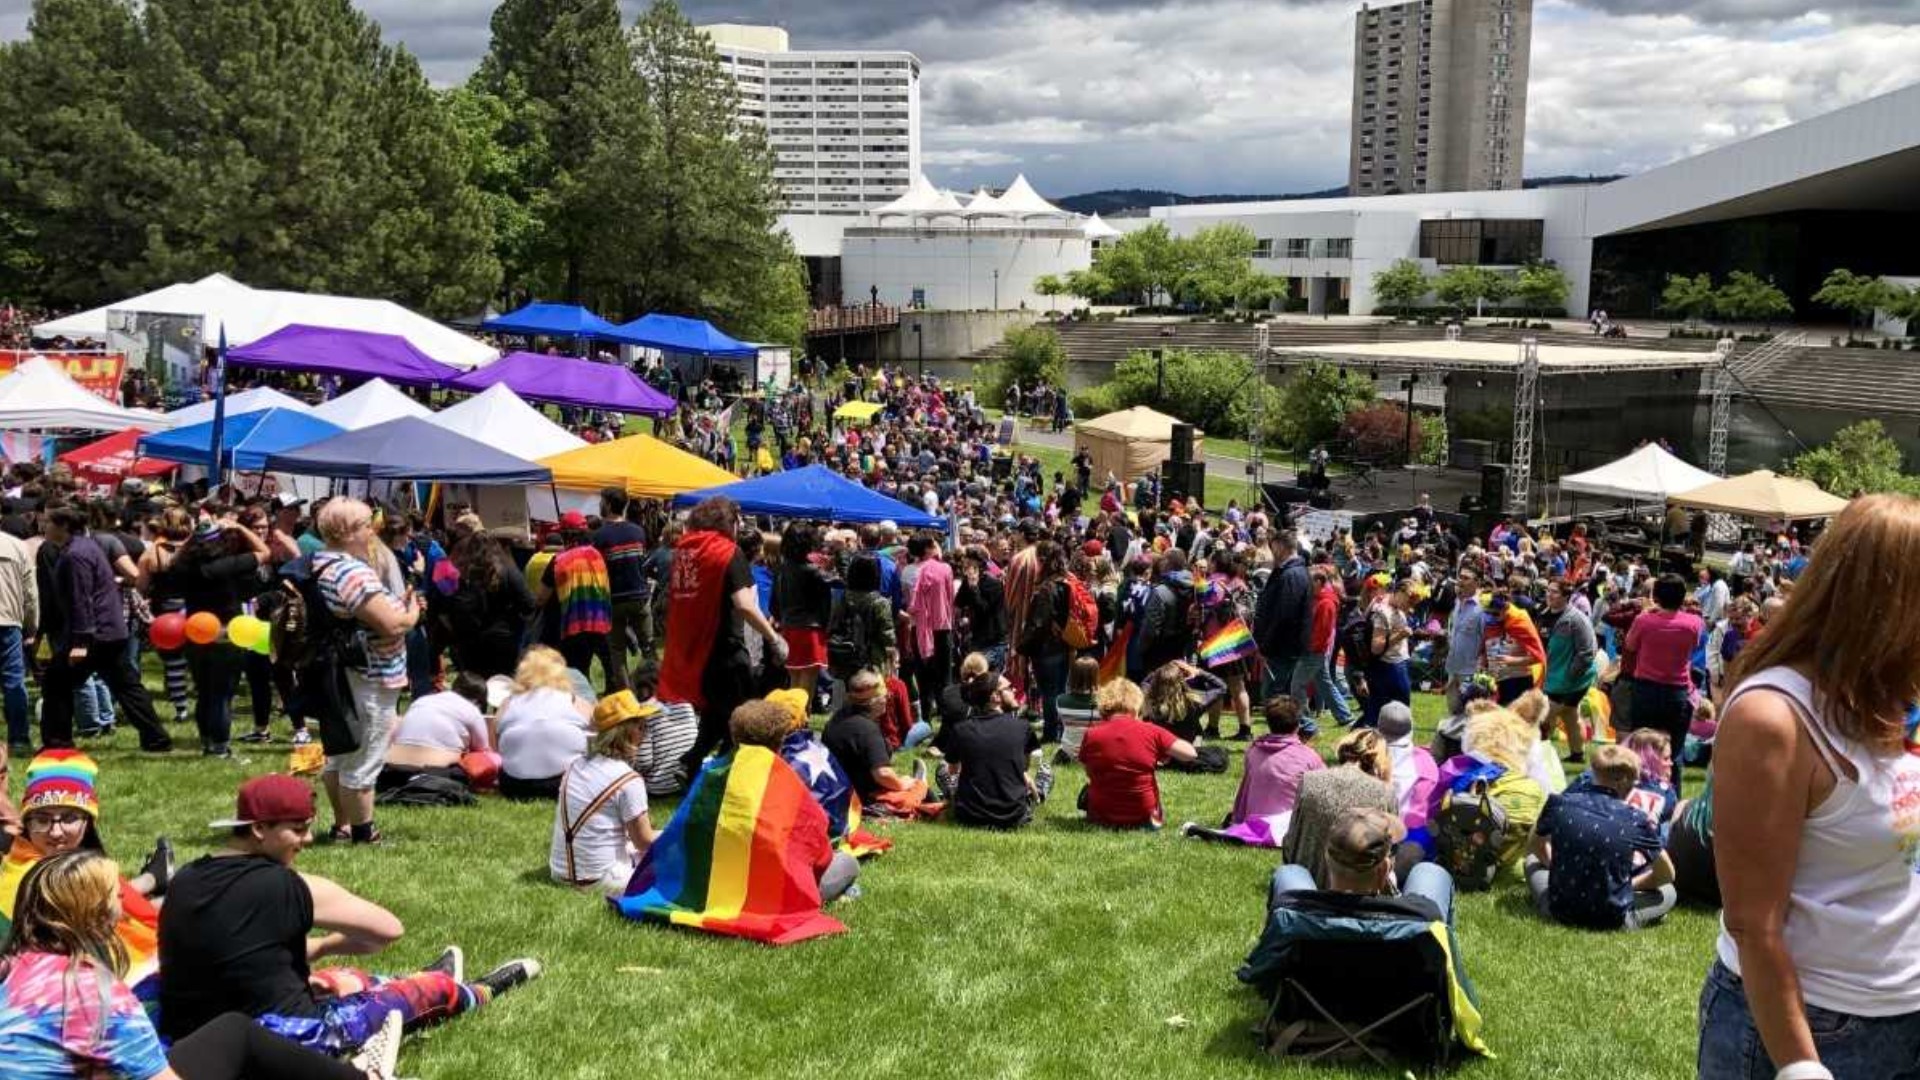 Changes coming to Spokane Pride after record 27,000 people attend